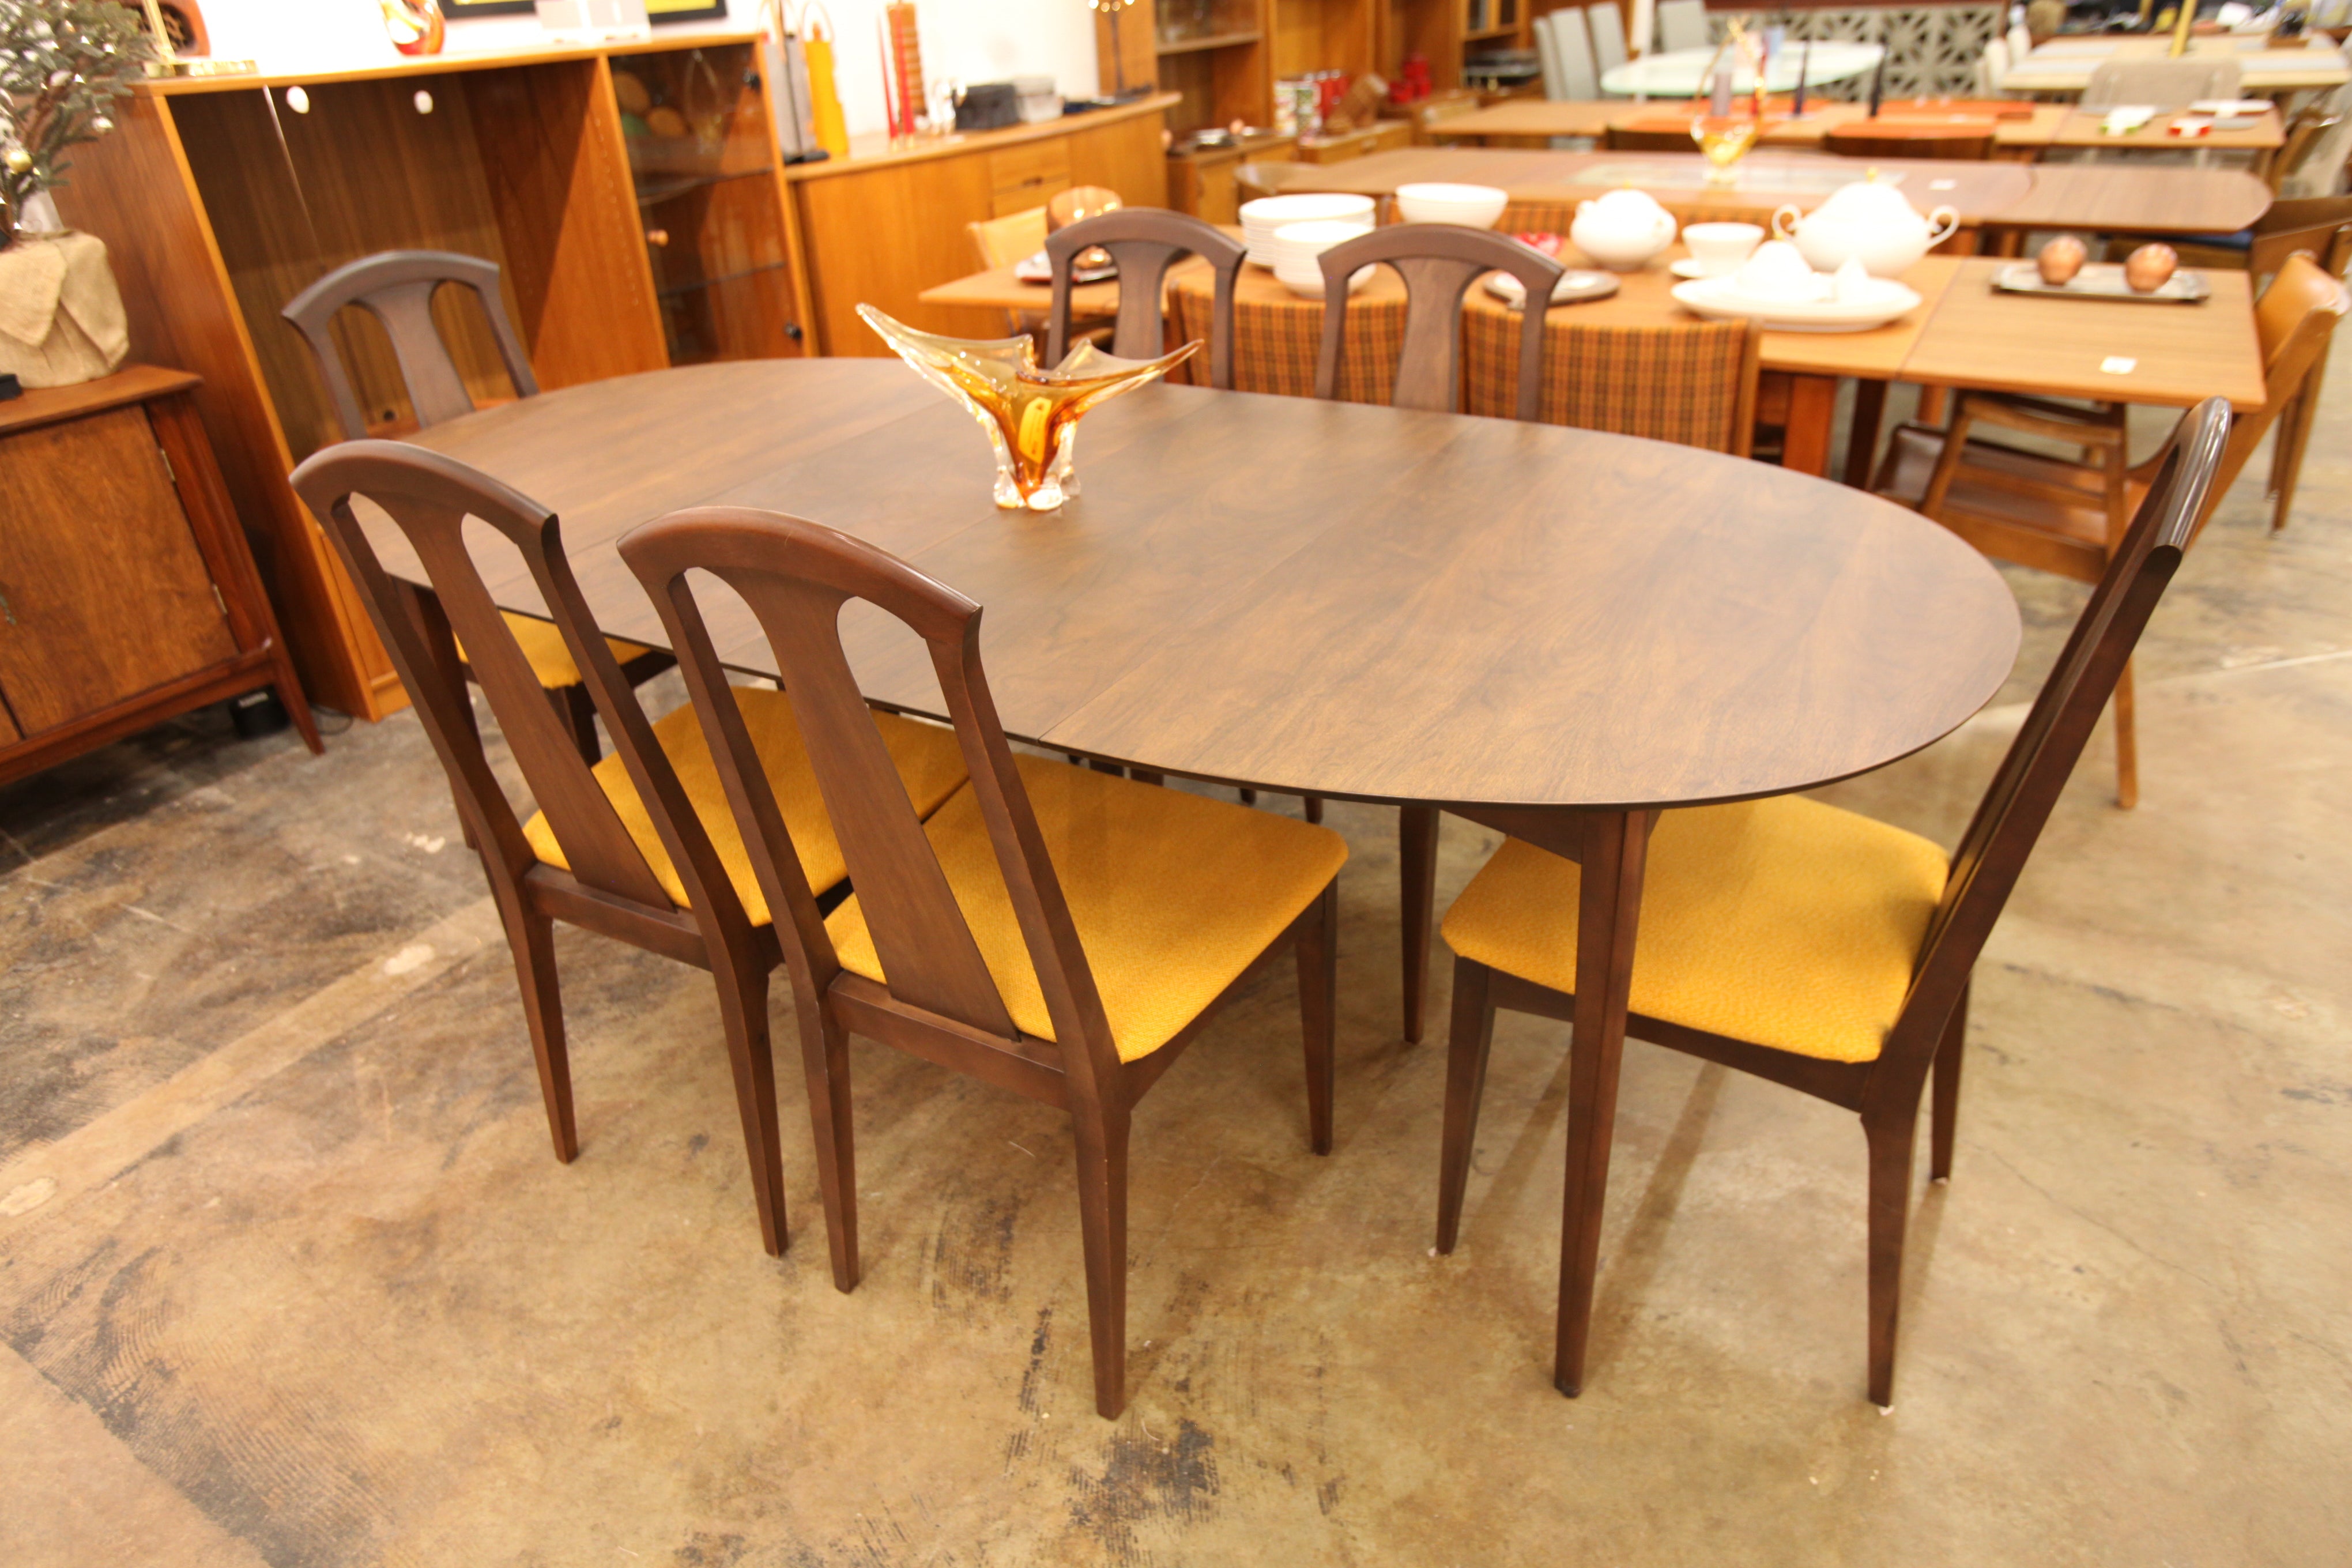 Set of 6 "Very Well Kept" Walnut Dining Chairs  (18.5"W x 21"D x 38"H)